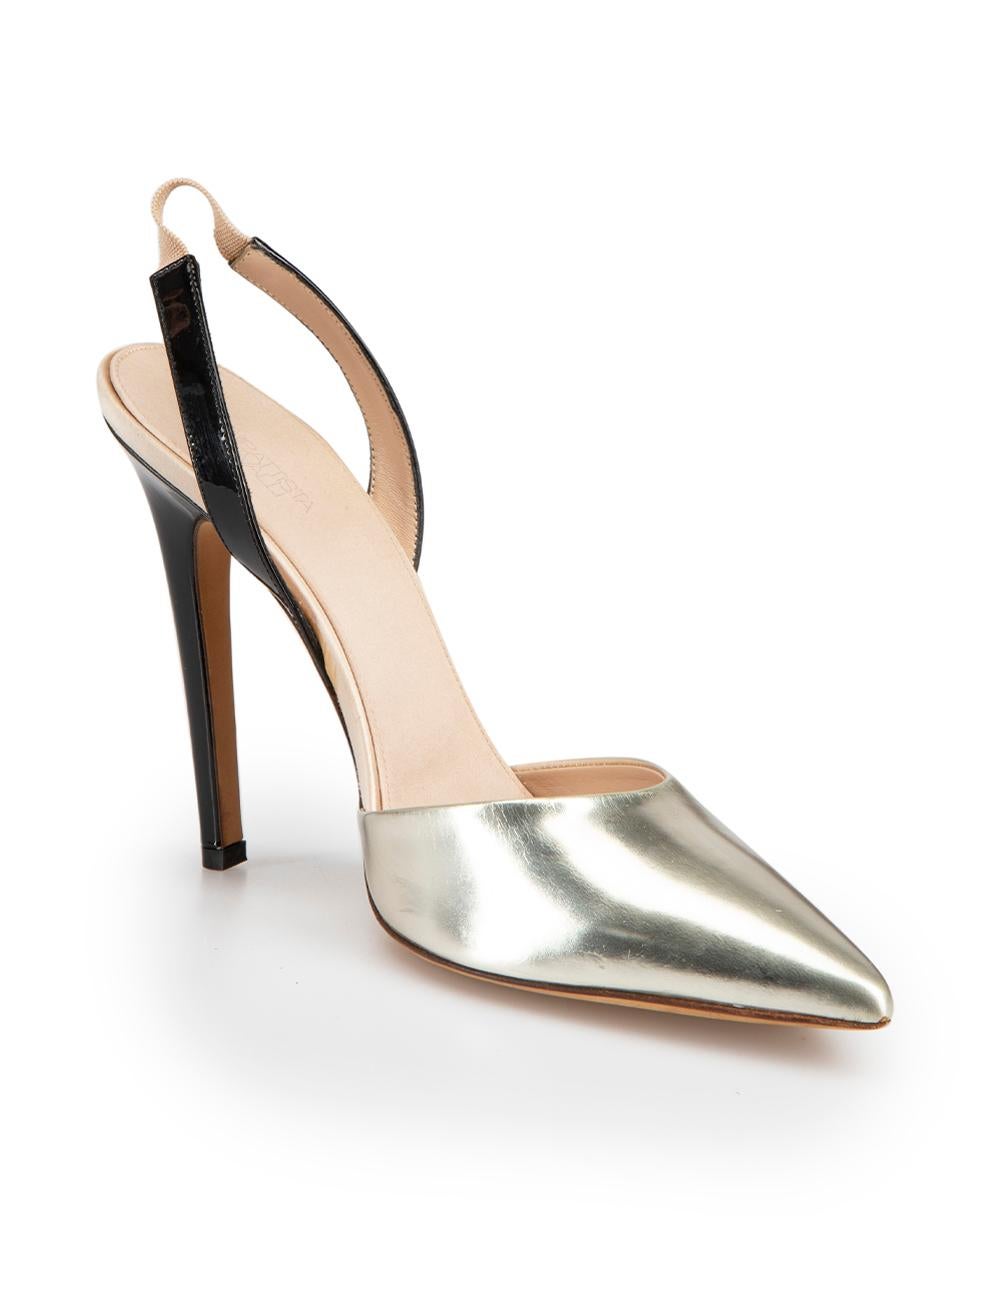 CONDITION is Very good. Minimal wear to the shoes is evident. Minimal wear to the right-shoe with scuffs and scratches, as well as a small indent to the right-shoe heel-stem on this used Giambattista Valli designer resale item.



Details


Metallic